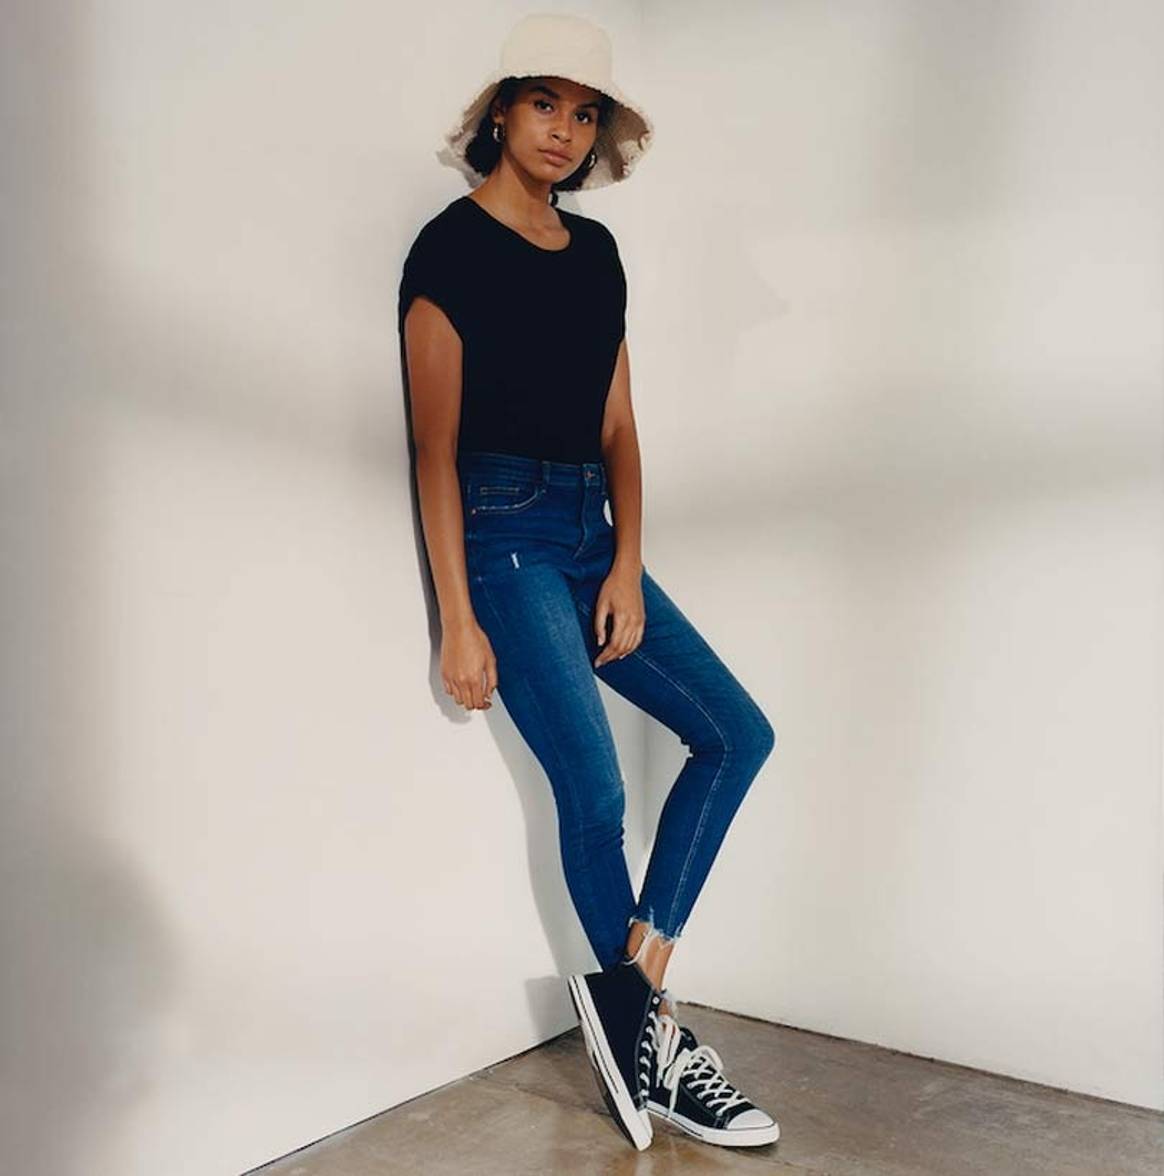 Primark launches jeans made with 100 percent sustainable cotton